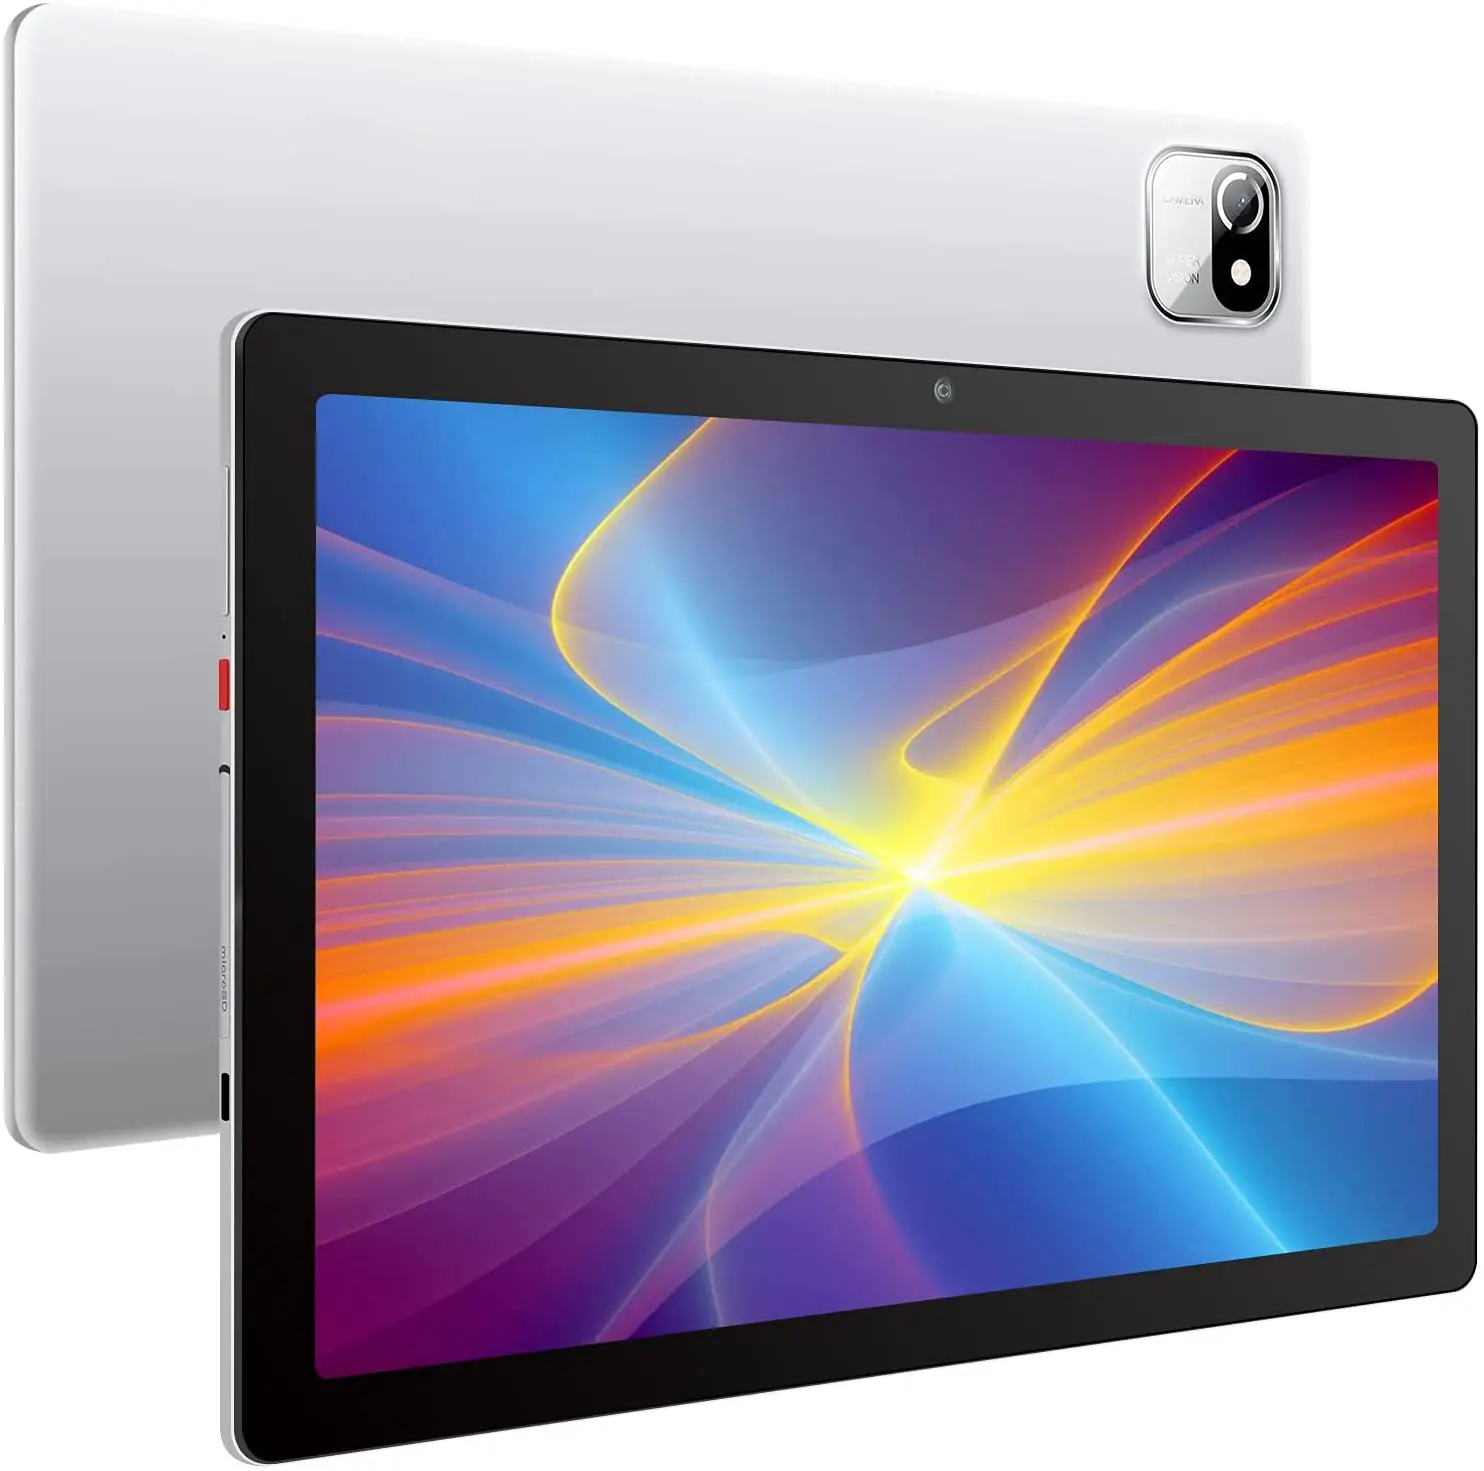 10.1 Inch Android Tablet Quad-Core 32GB IPS HD Display 6000mAh Tablets (Silver)